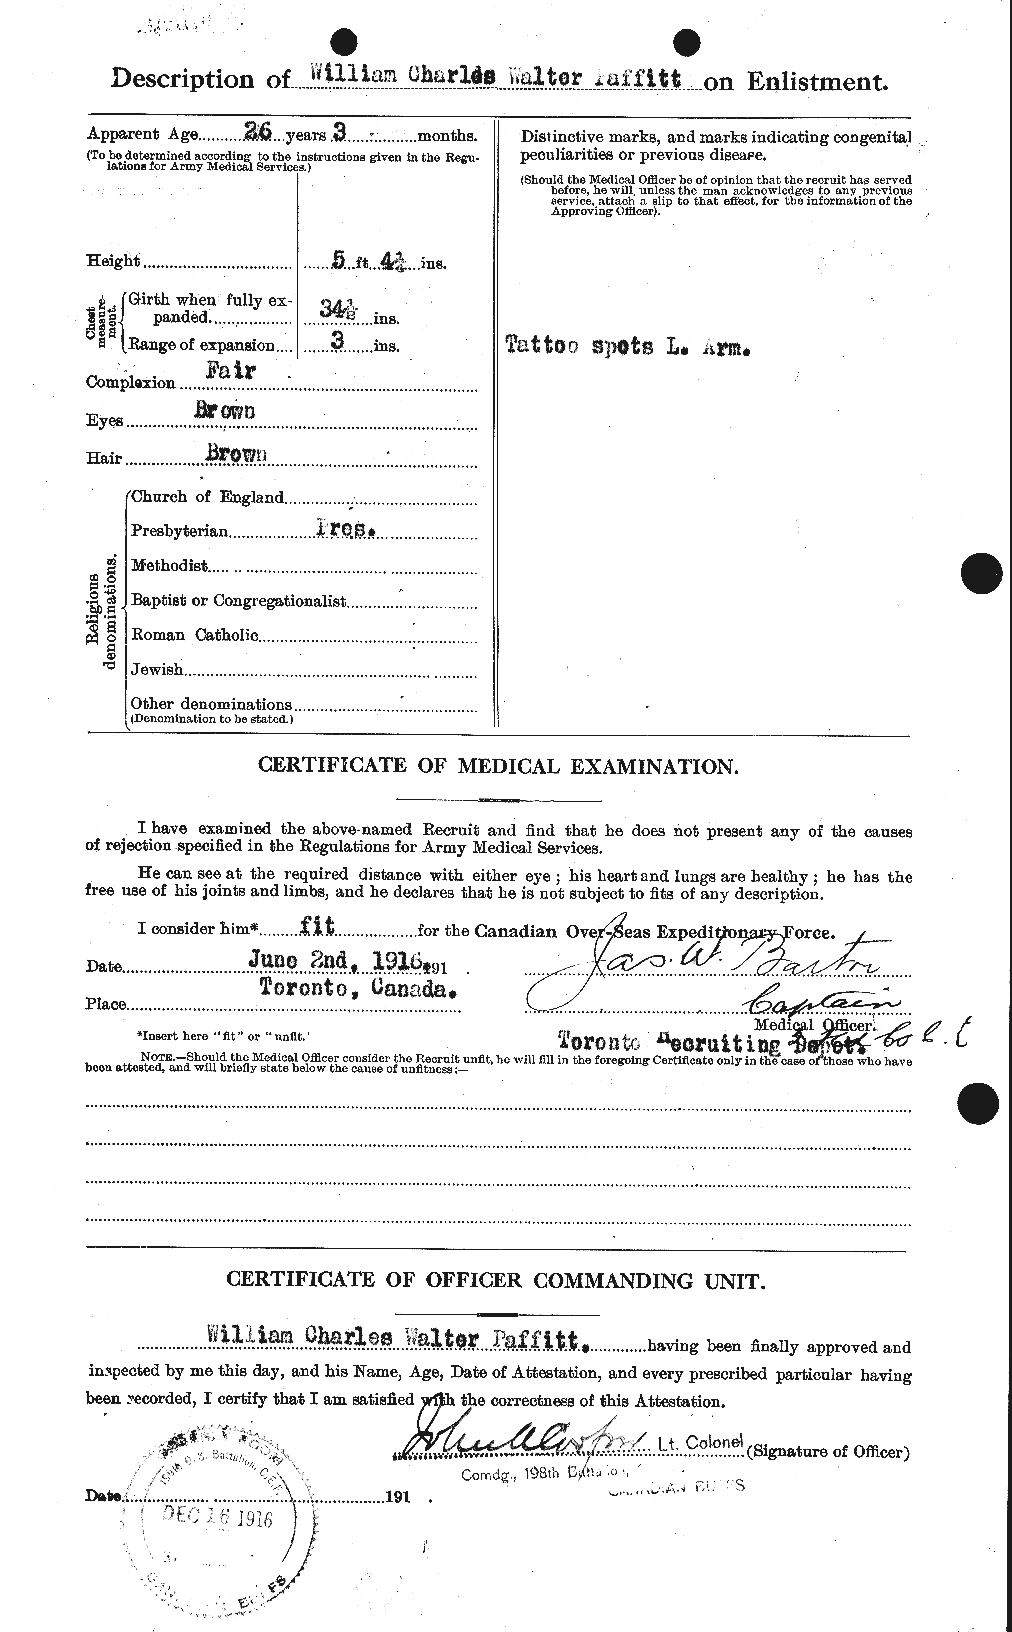 Personnel Records of the First World War - CEF 561960b